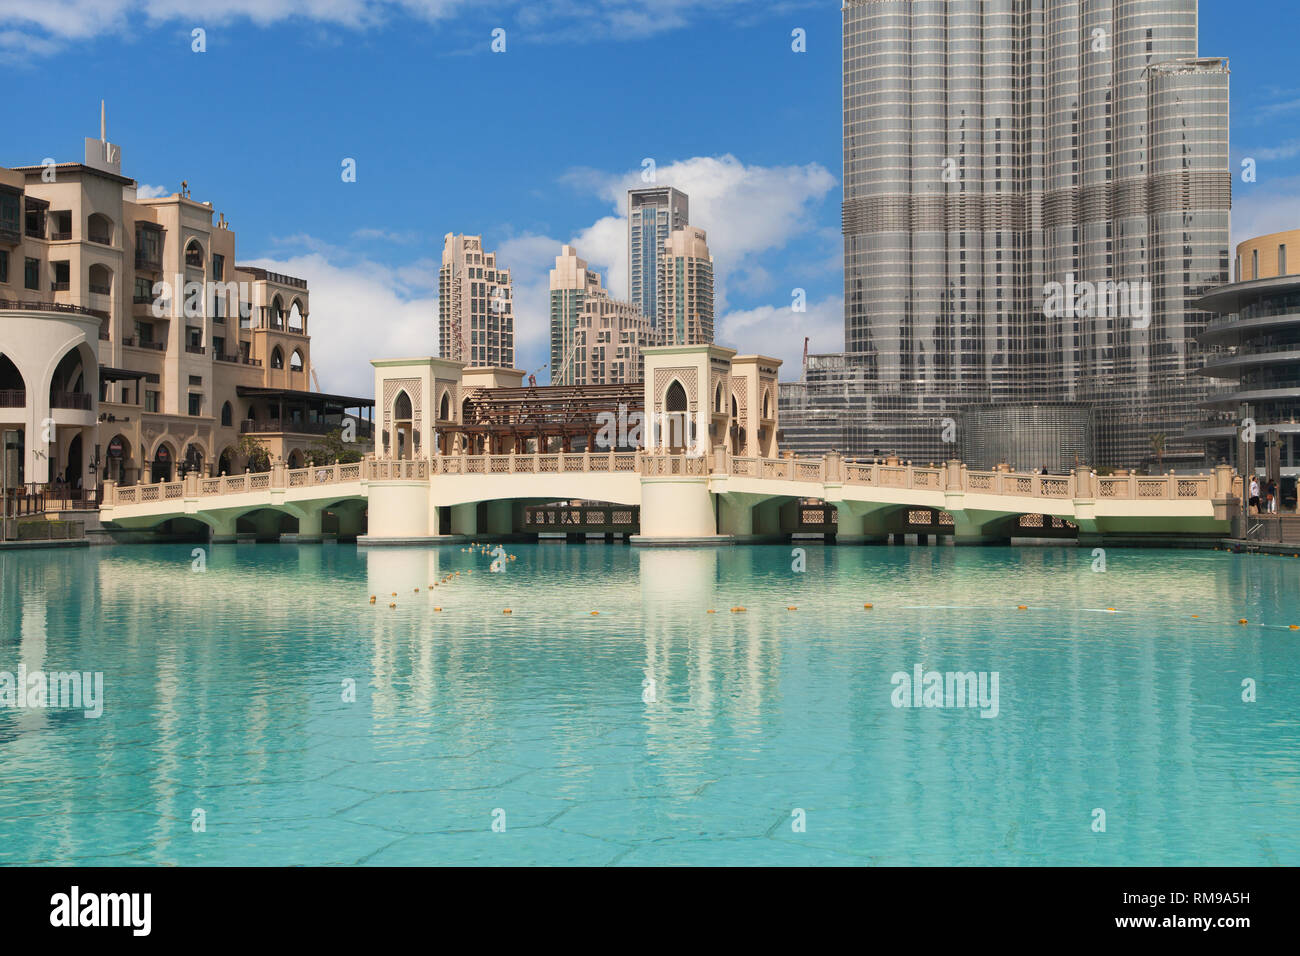 Dubai, United Arab Emirates - September 9, 2018: The Downtown Dubai complex in Dubai, UAE, is home to some of the city's most important landmarks incl Stock Photo